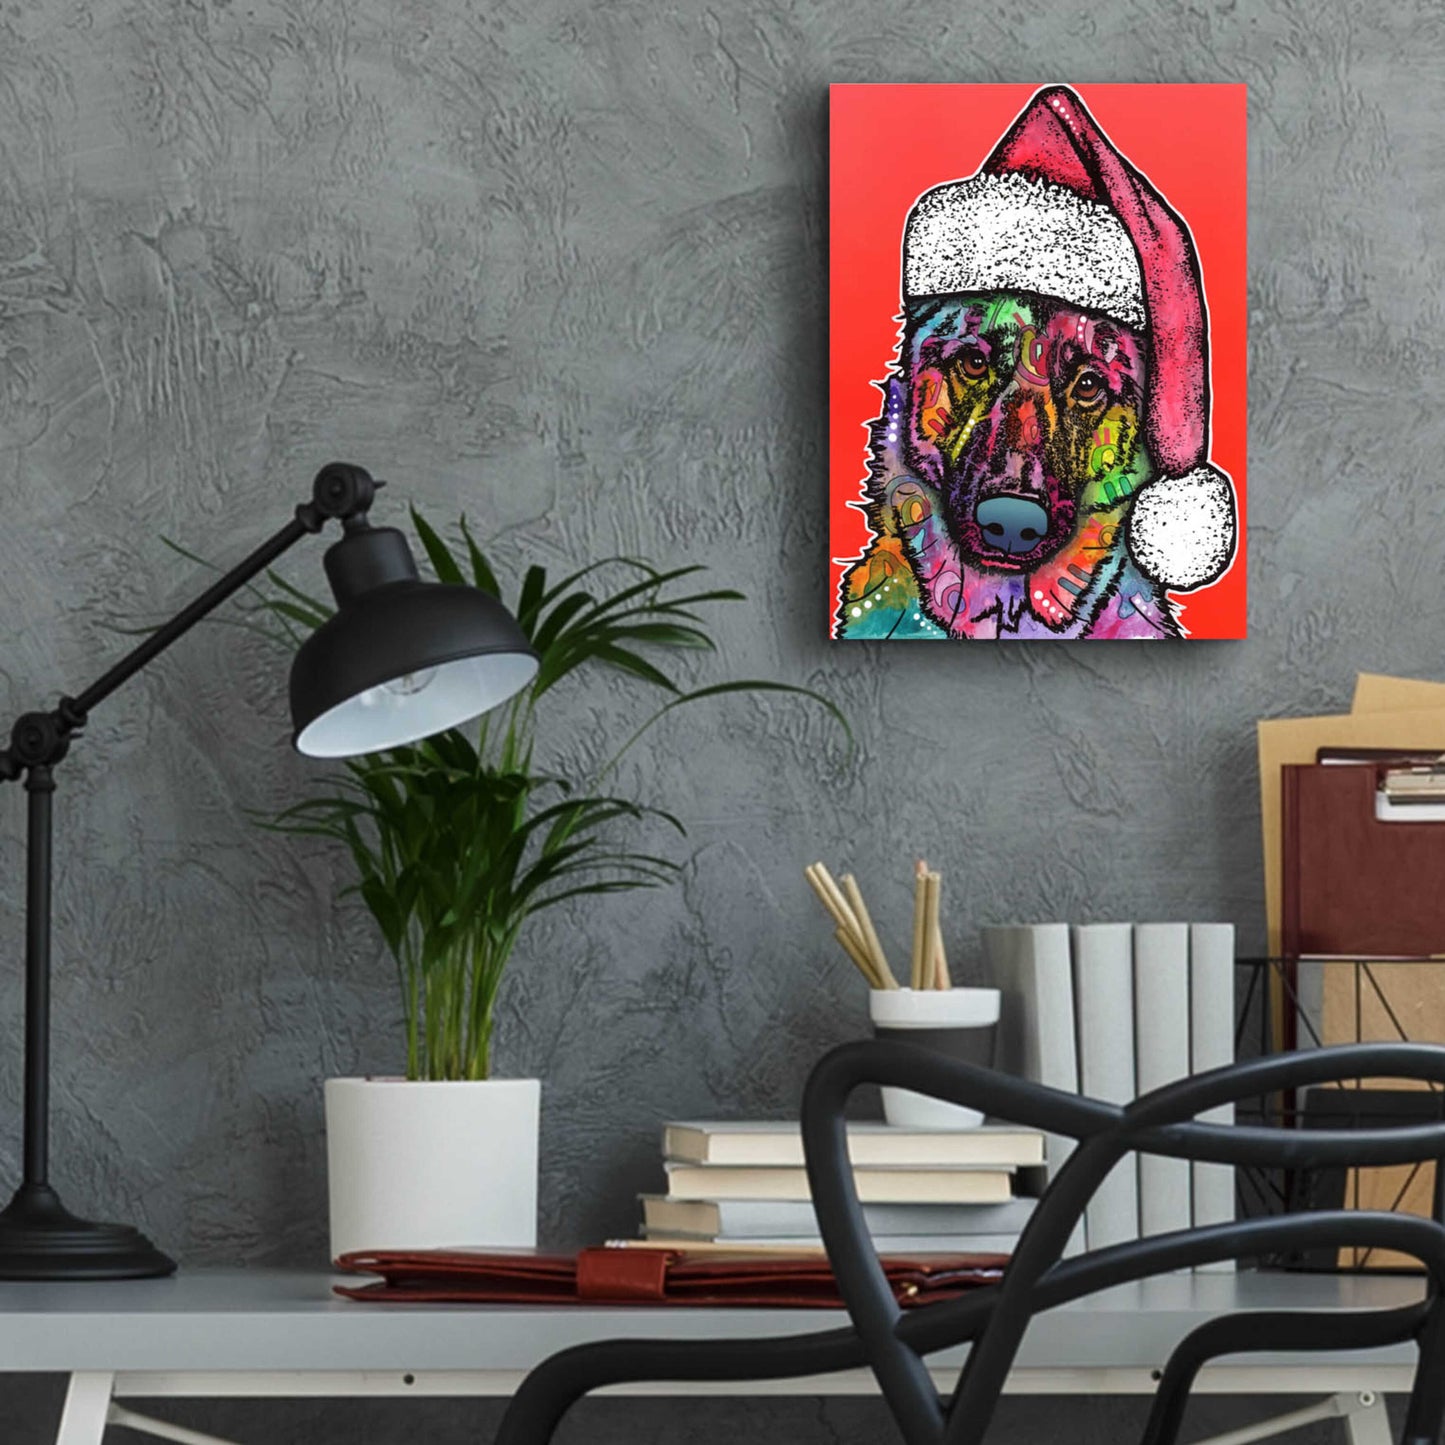 Epic Art 'Christmas Dog' by Dean Russo, Acrylic Glass Wall Art,12x16